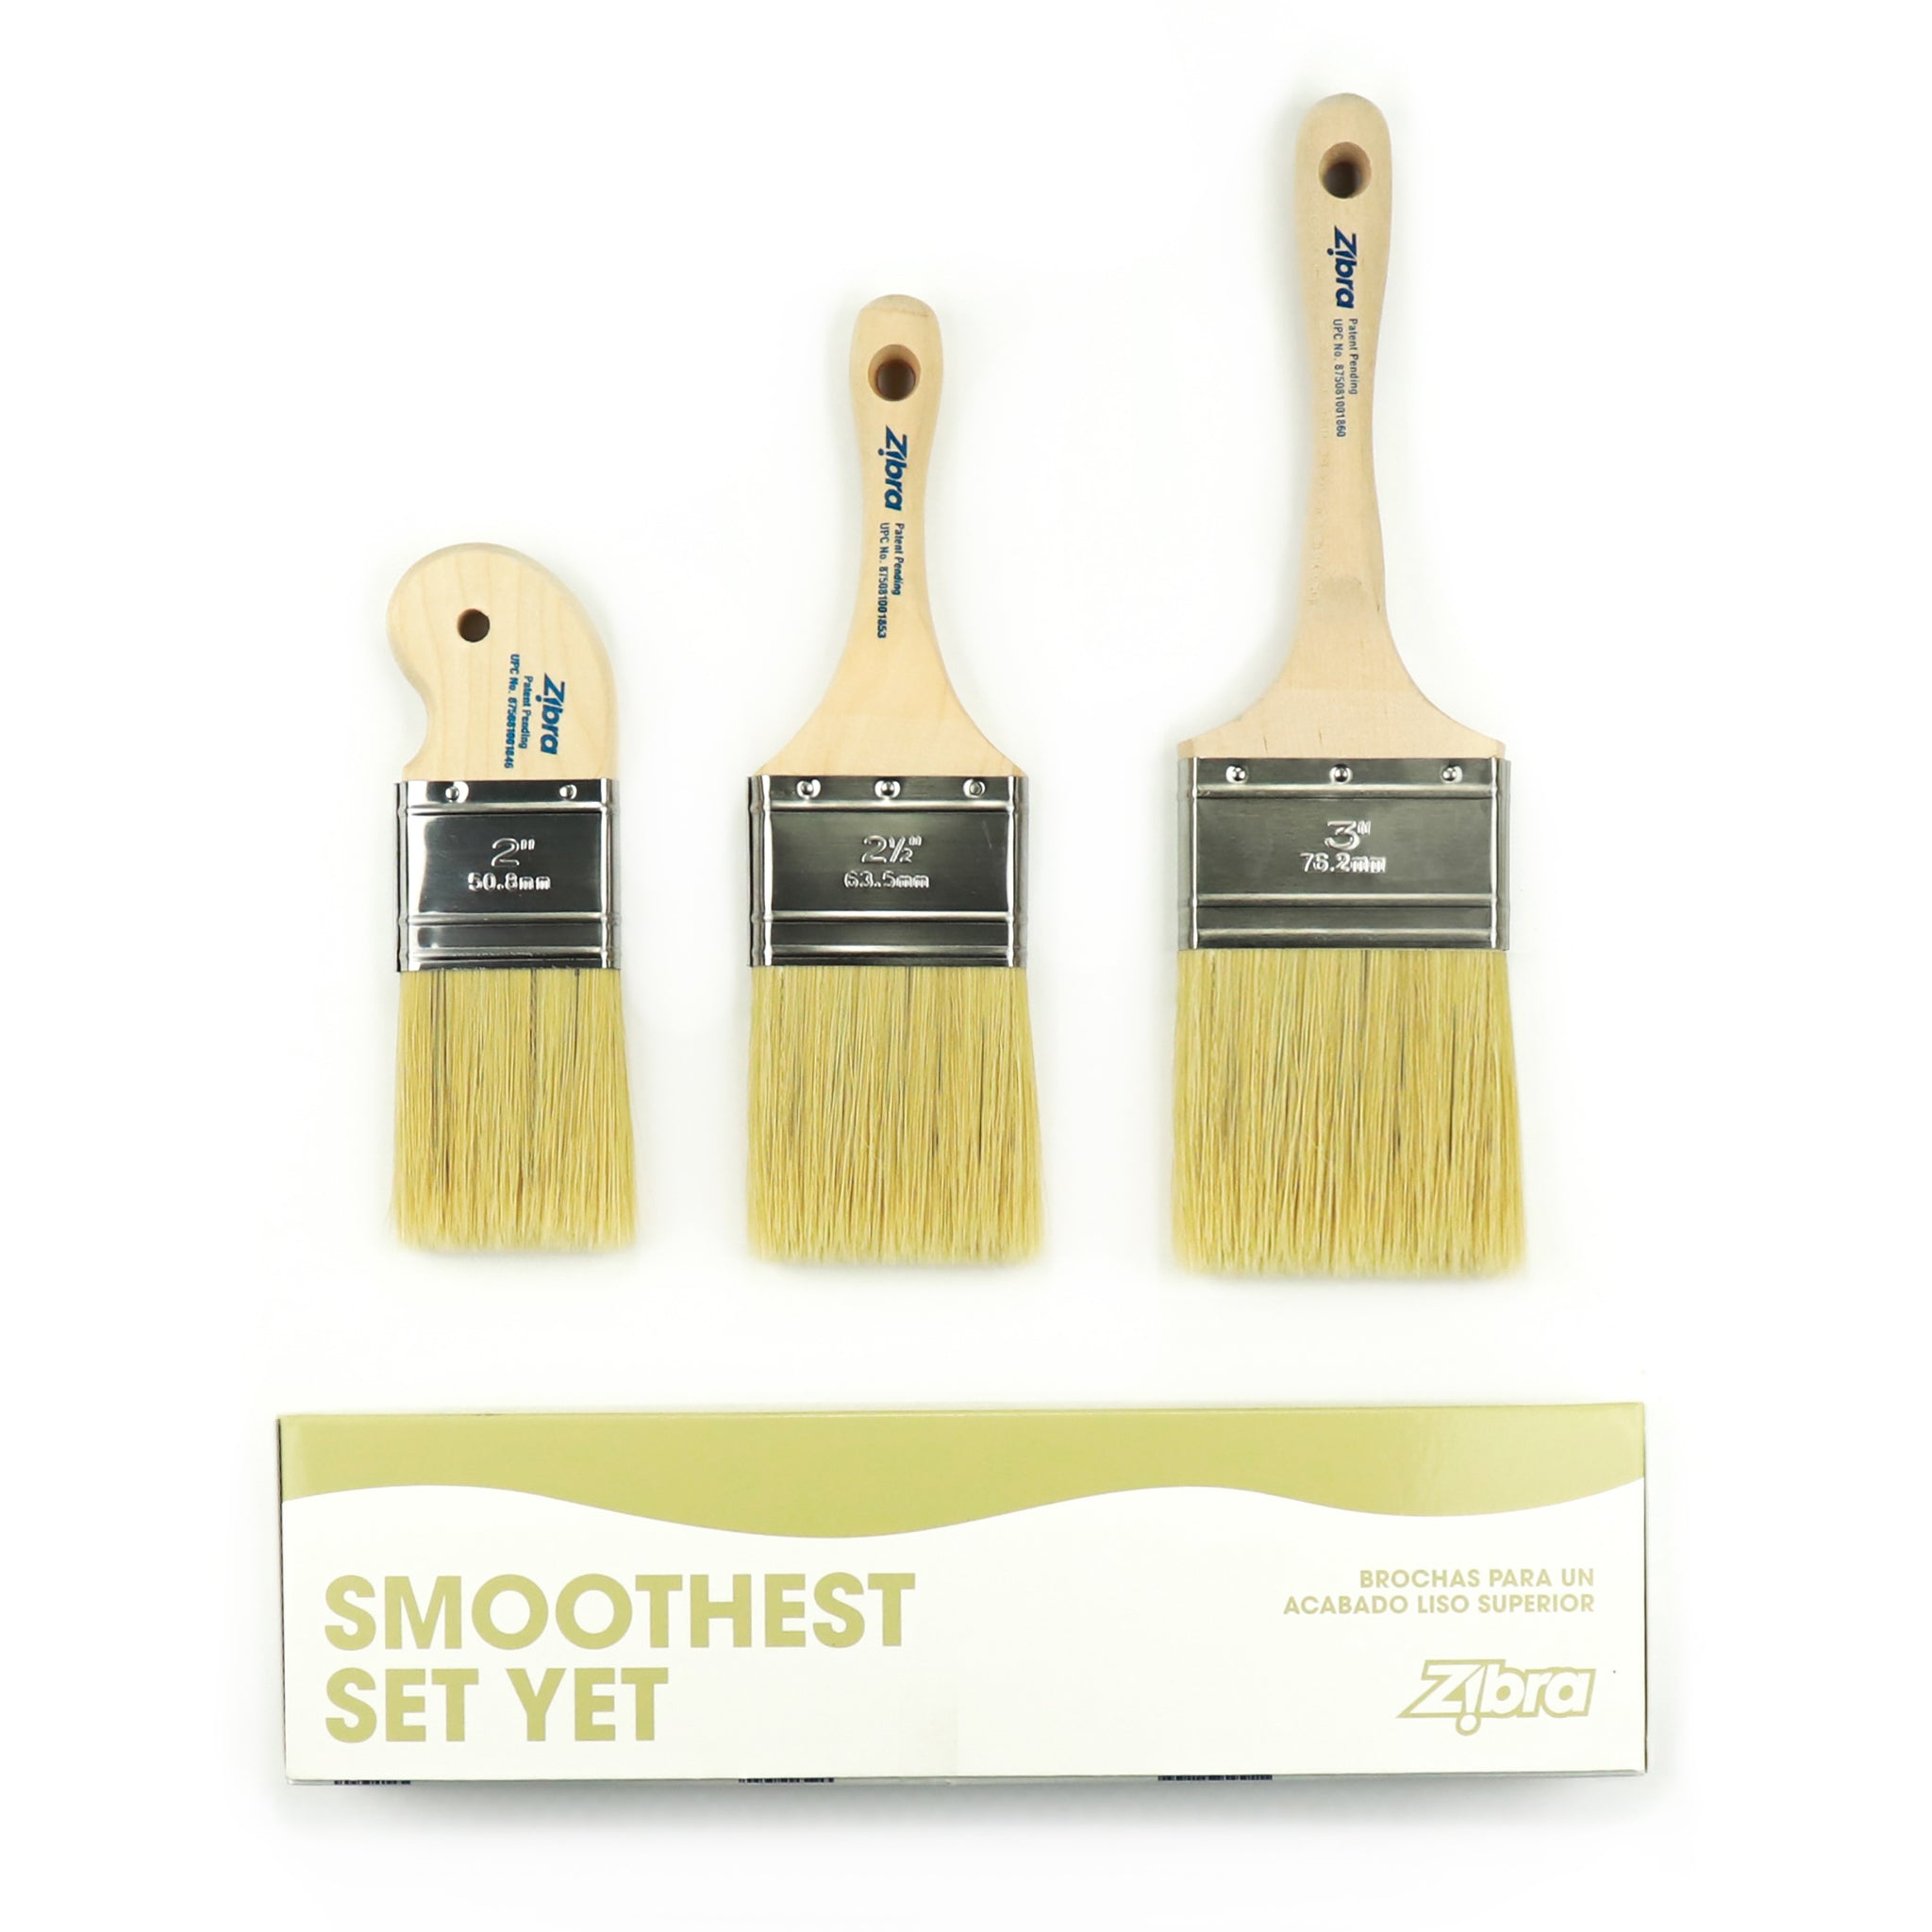 Paint Brushes - Wall Paint Brush - Shop Paint Brush Packages